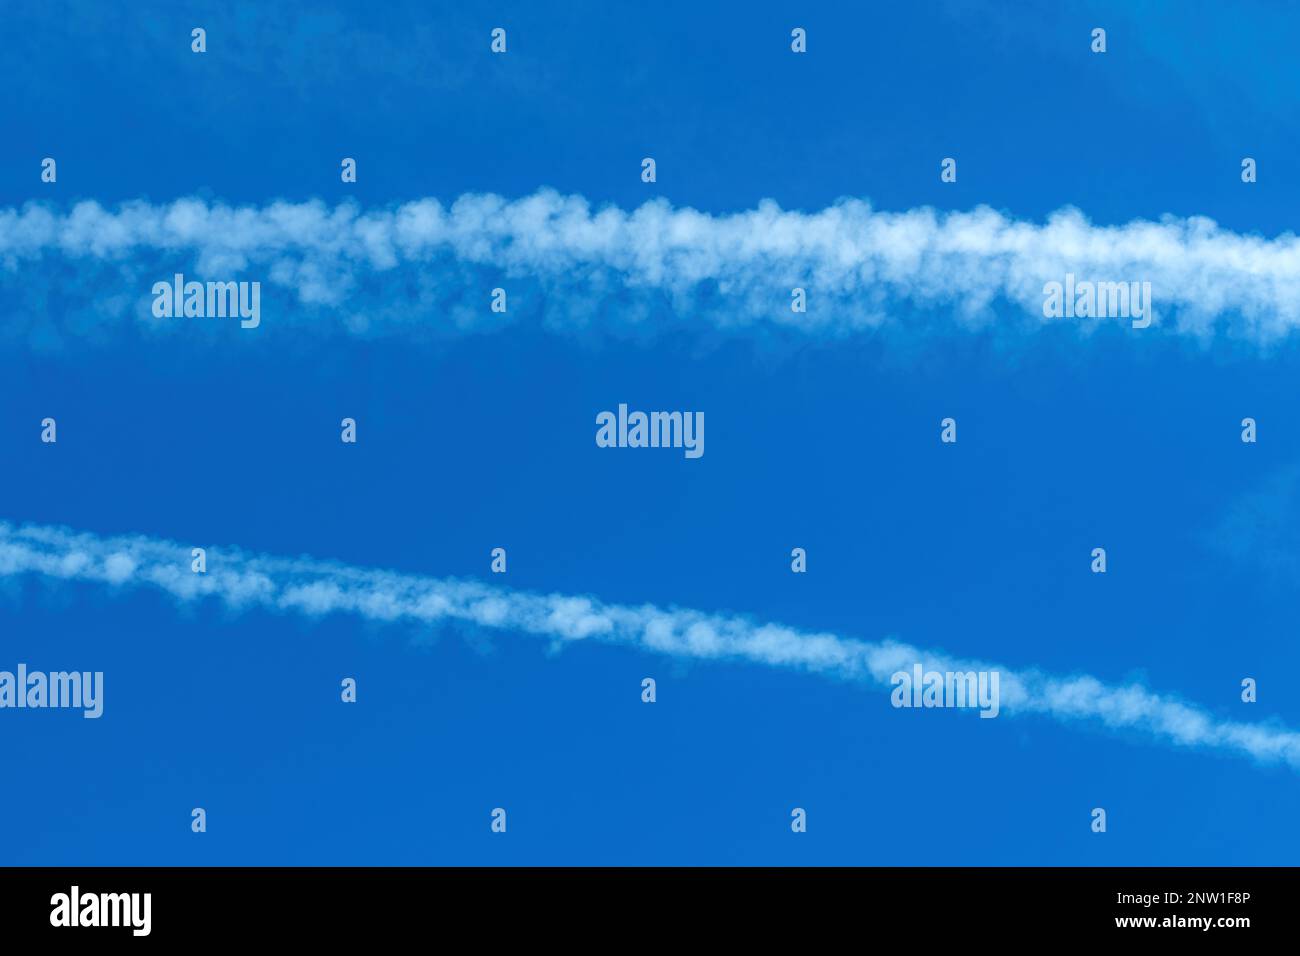 Airplane contrail across the blue sky, copy space included Stock Photo